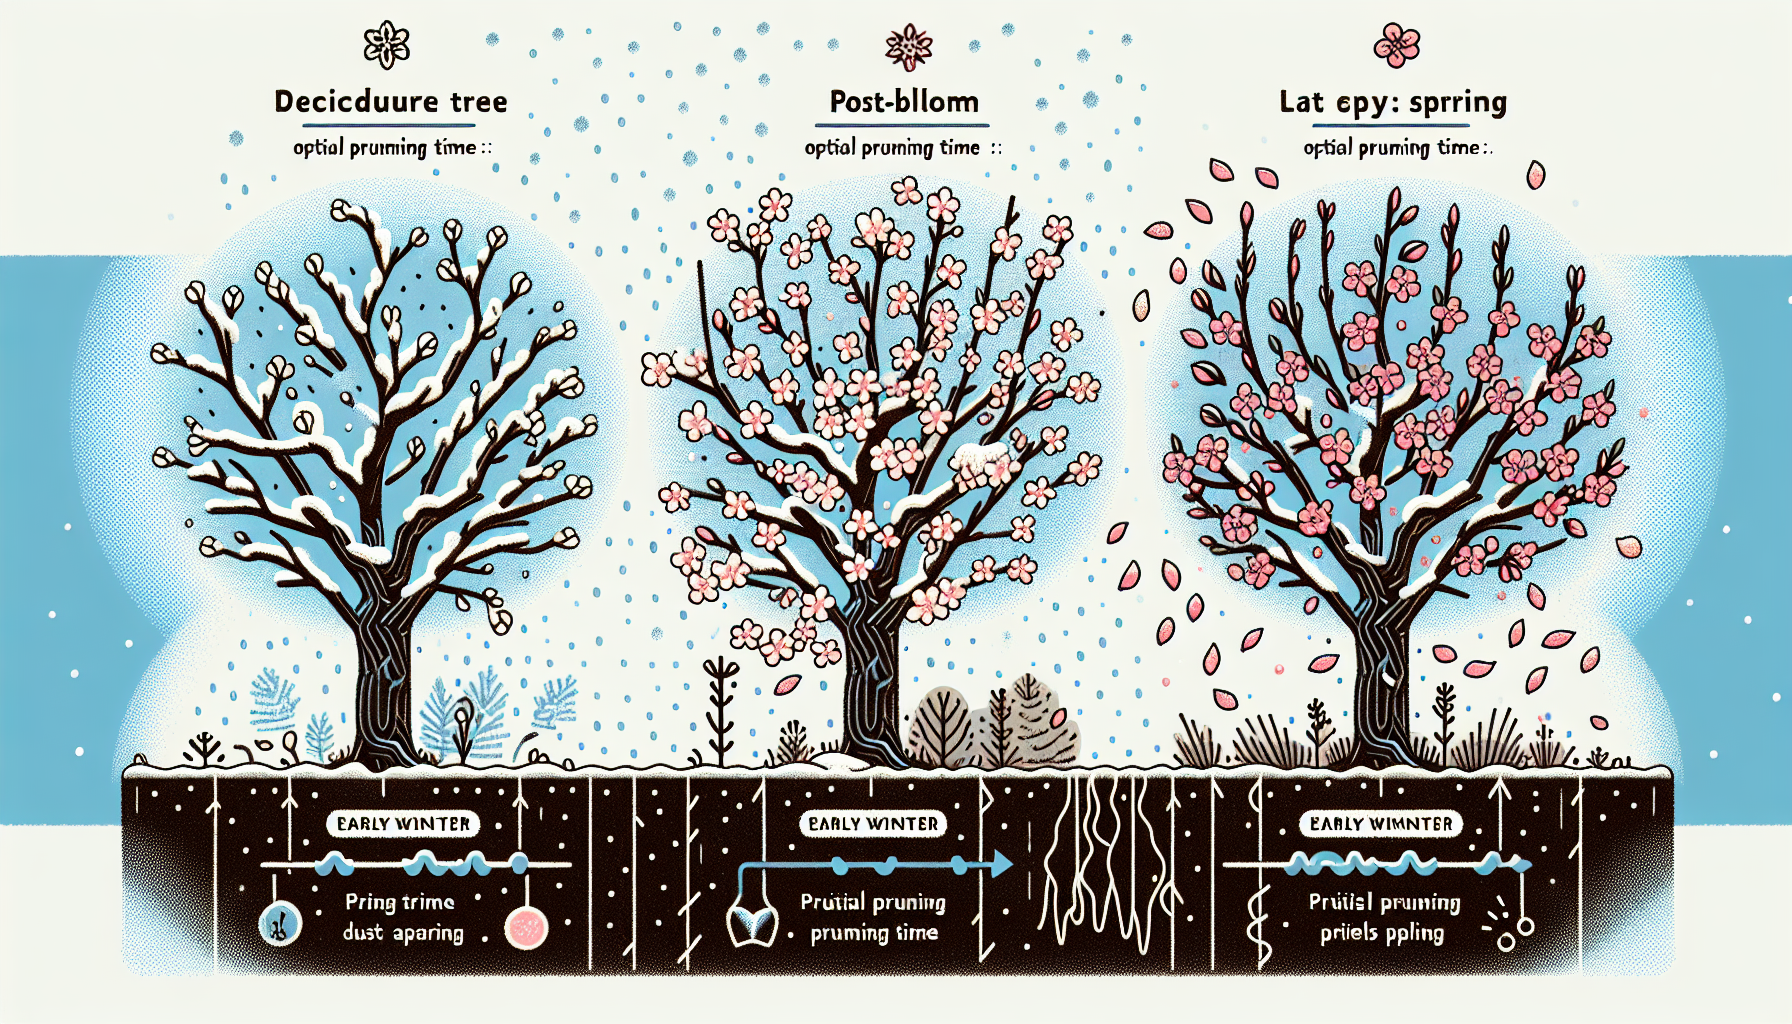 An illustration depicting the ideal pruning times for different tree types